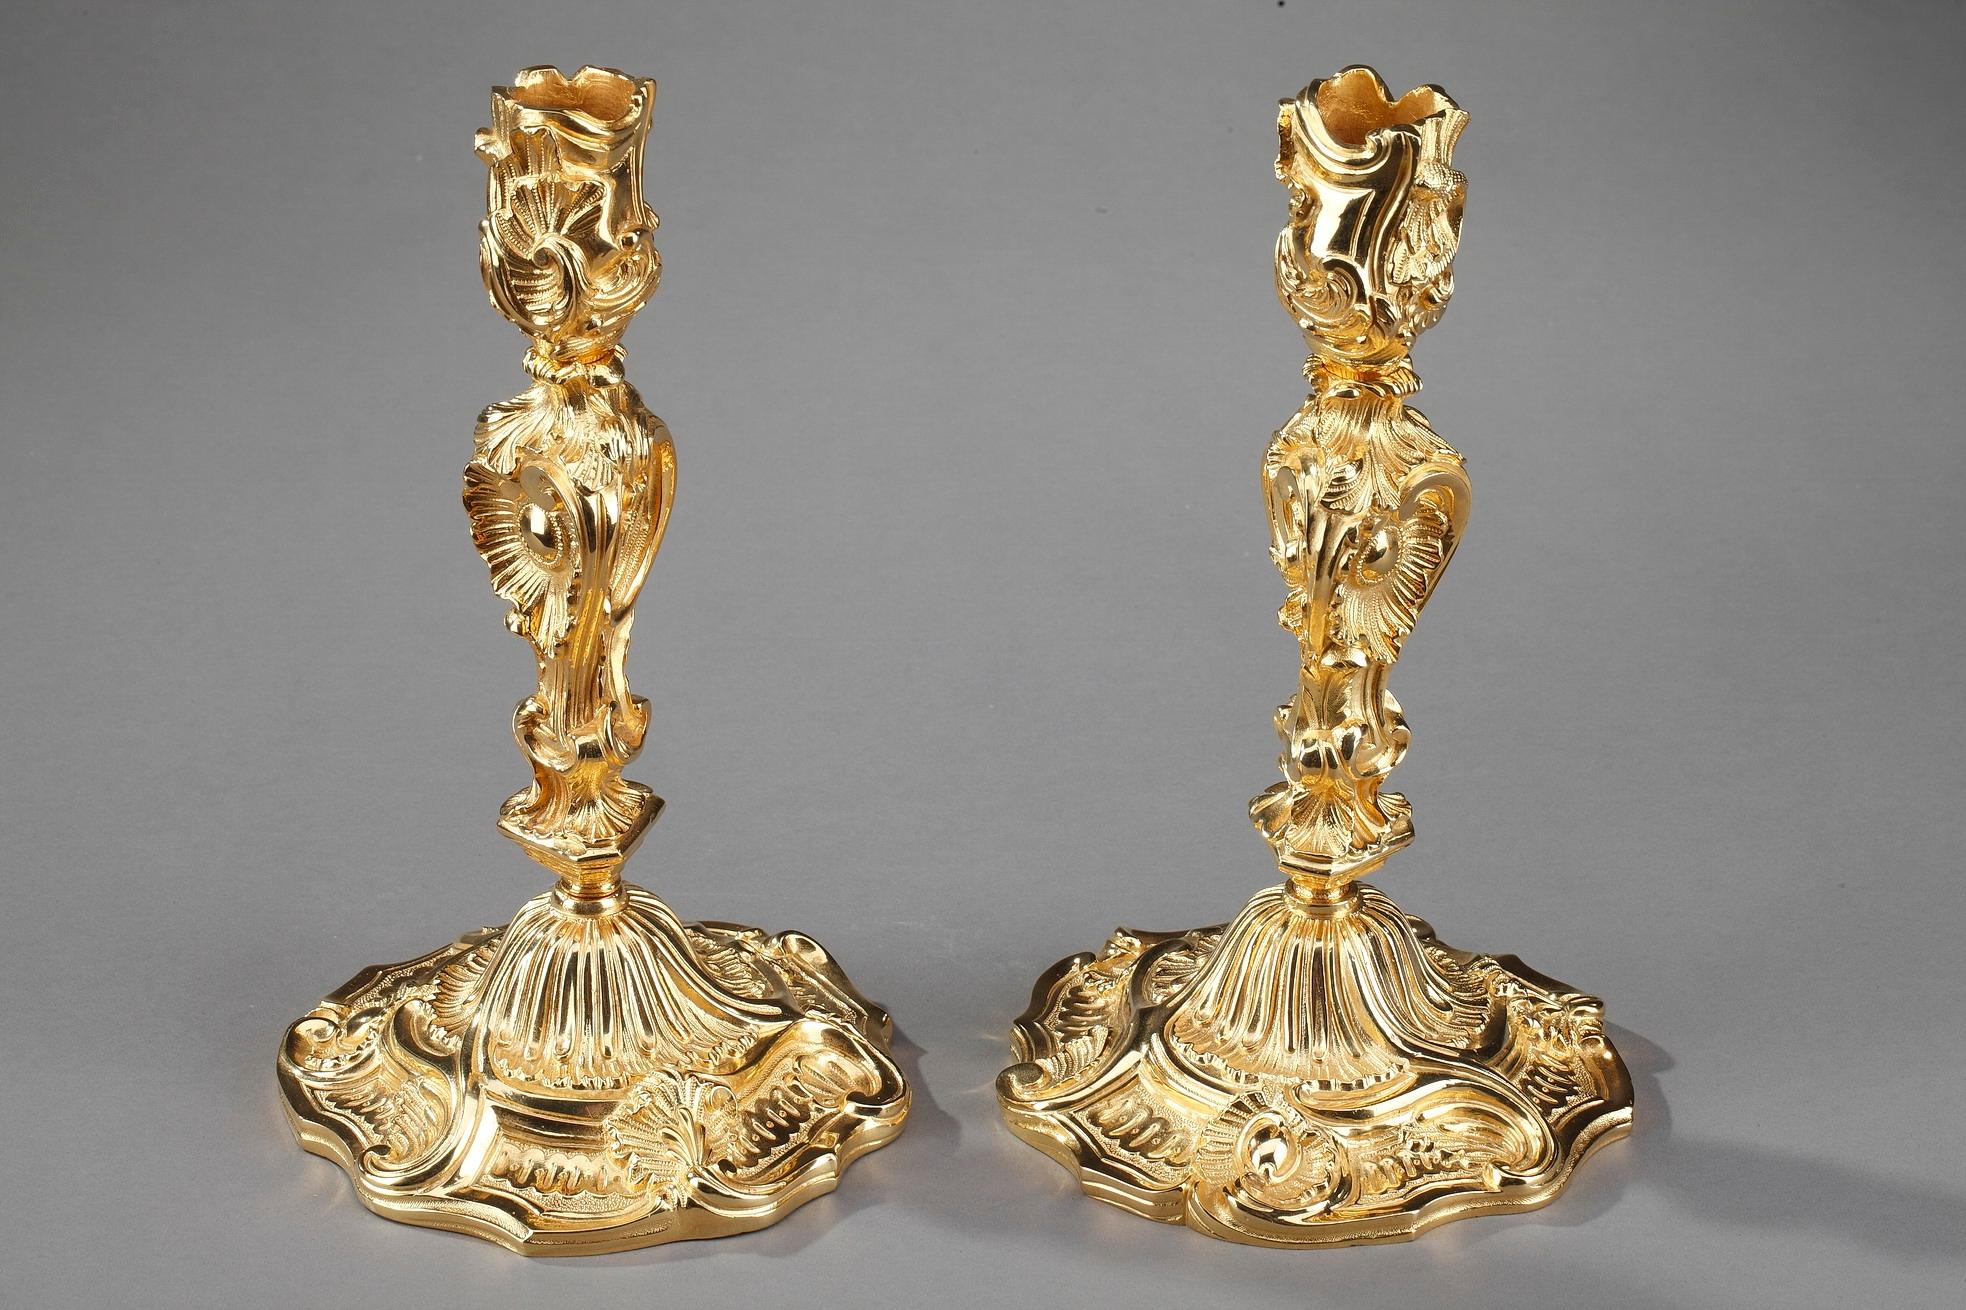 Pair of gilt and chiseled bronze Louis XV style candlesticks. The stem of each candlestick is sculpted with abundant foliage and intricate ribbing, spiraling upward to support the nozzle which is also embellished with lively foliage. Each